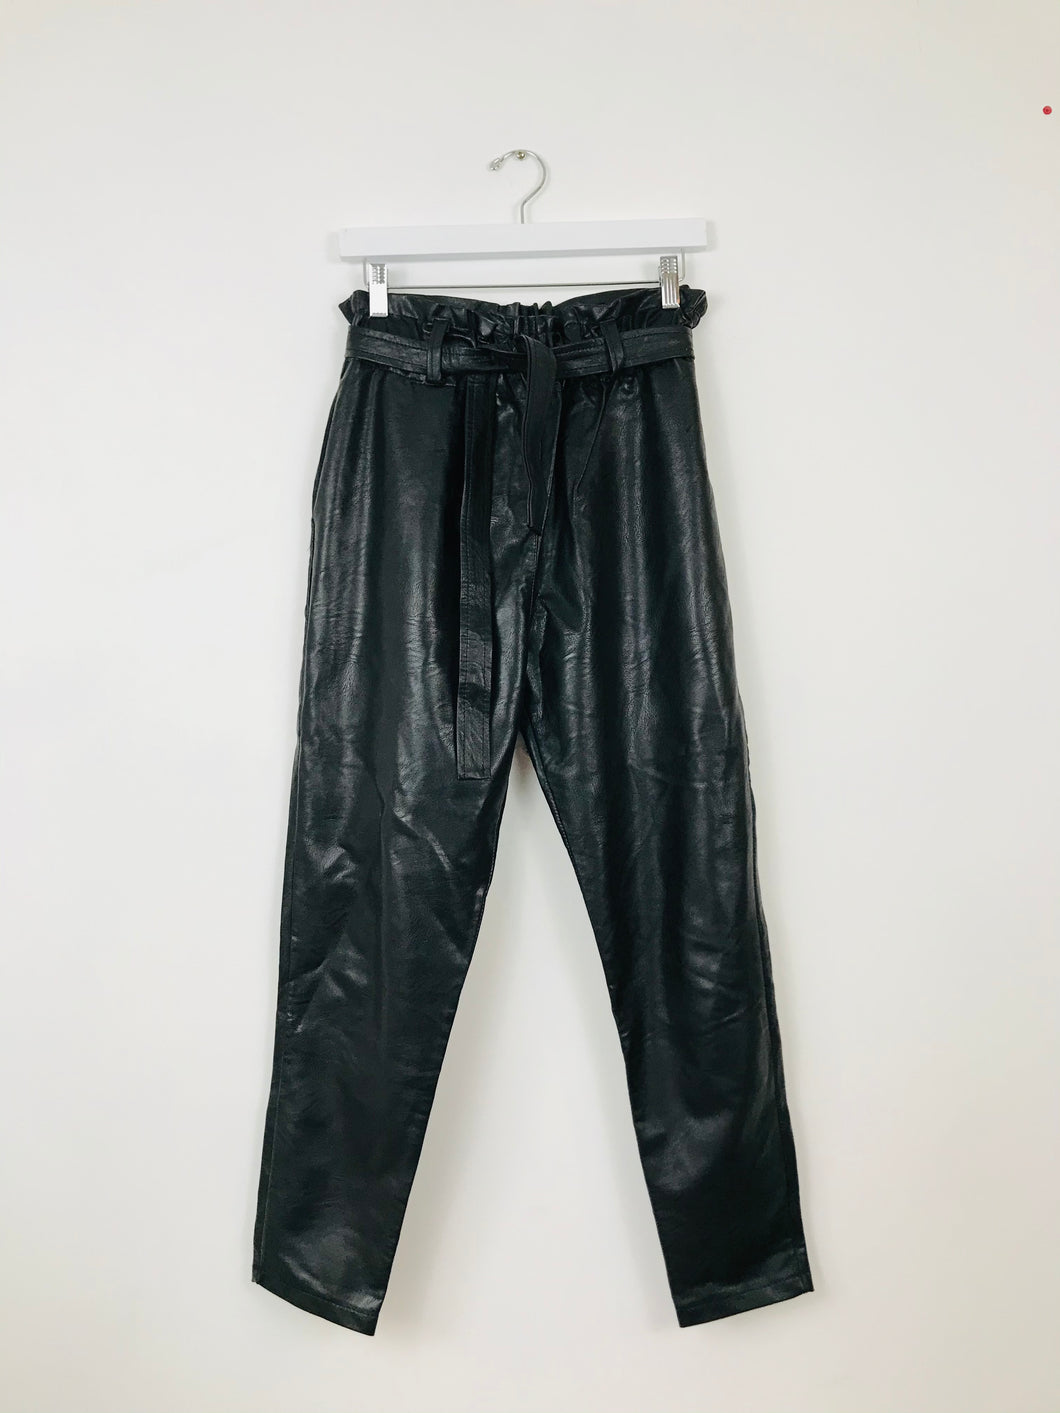 Womens Tie Waist Leather Trousers | XS-S | Black